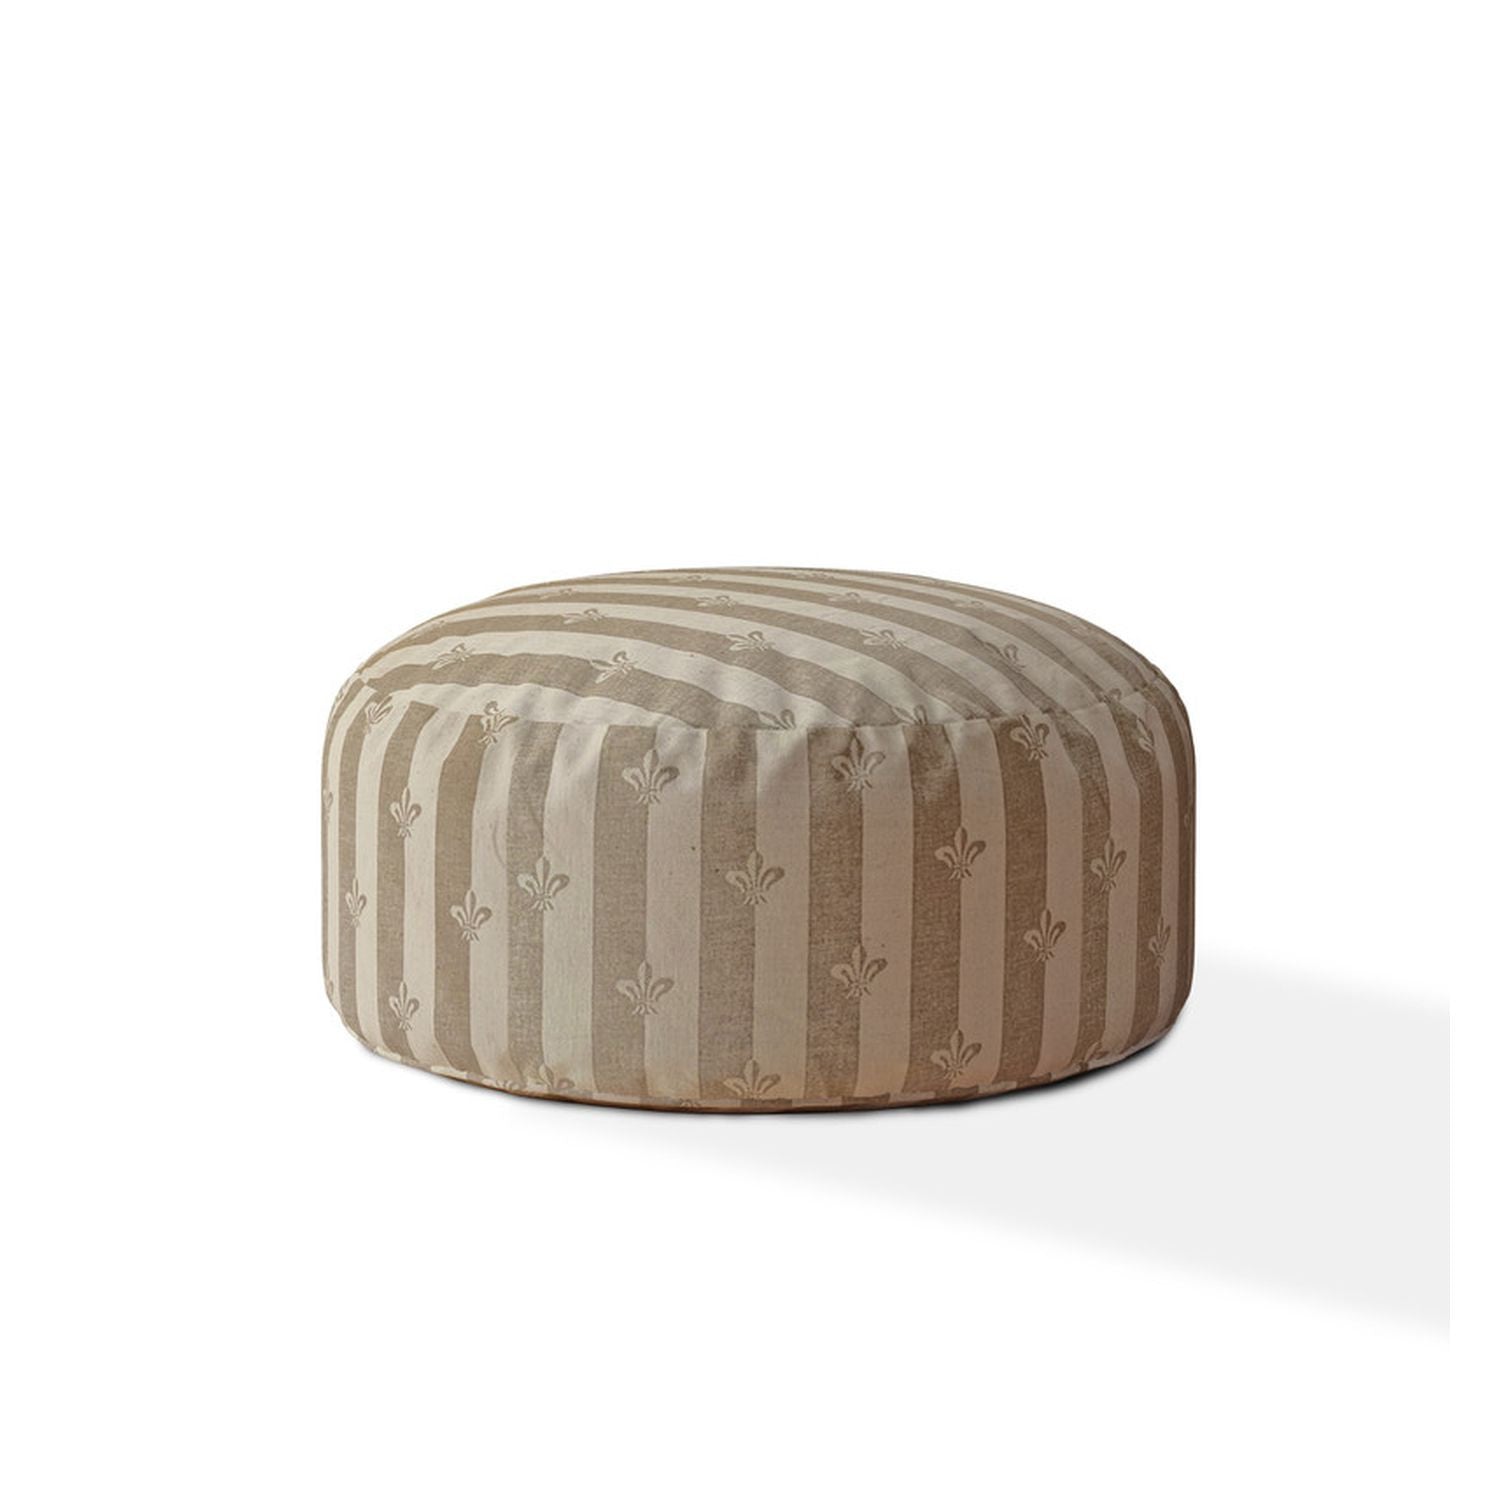 24" Taupe Flax Round Floral Pouf Ottoman